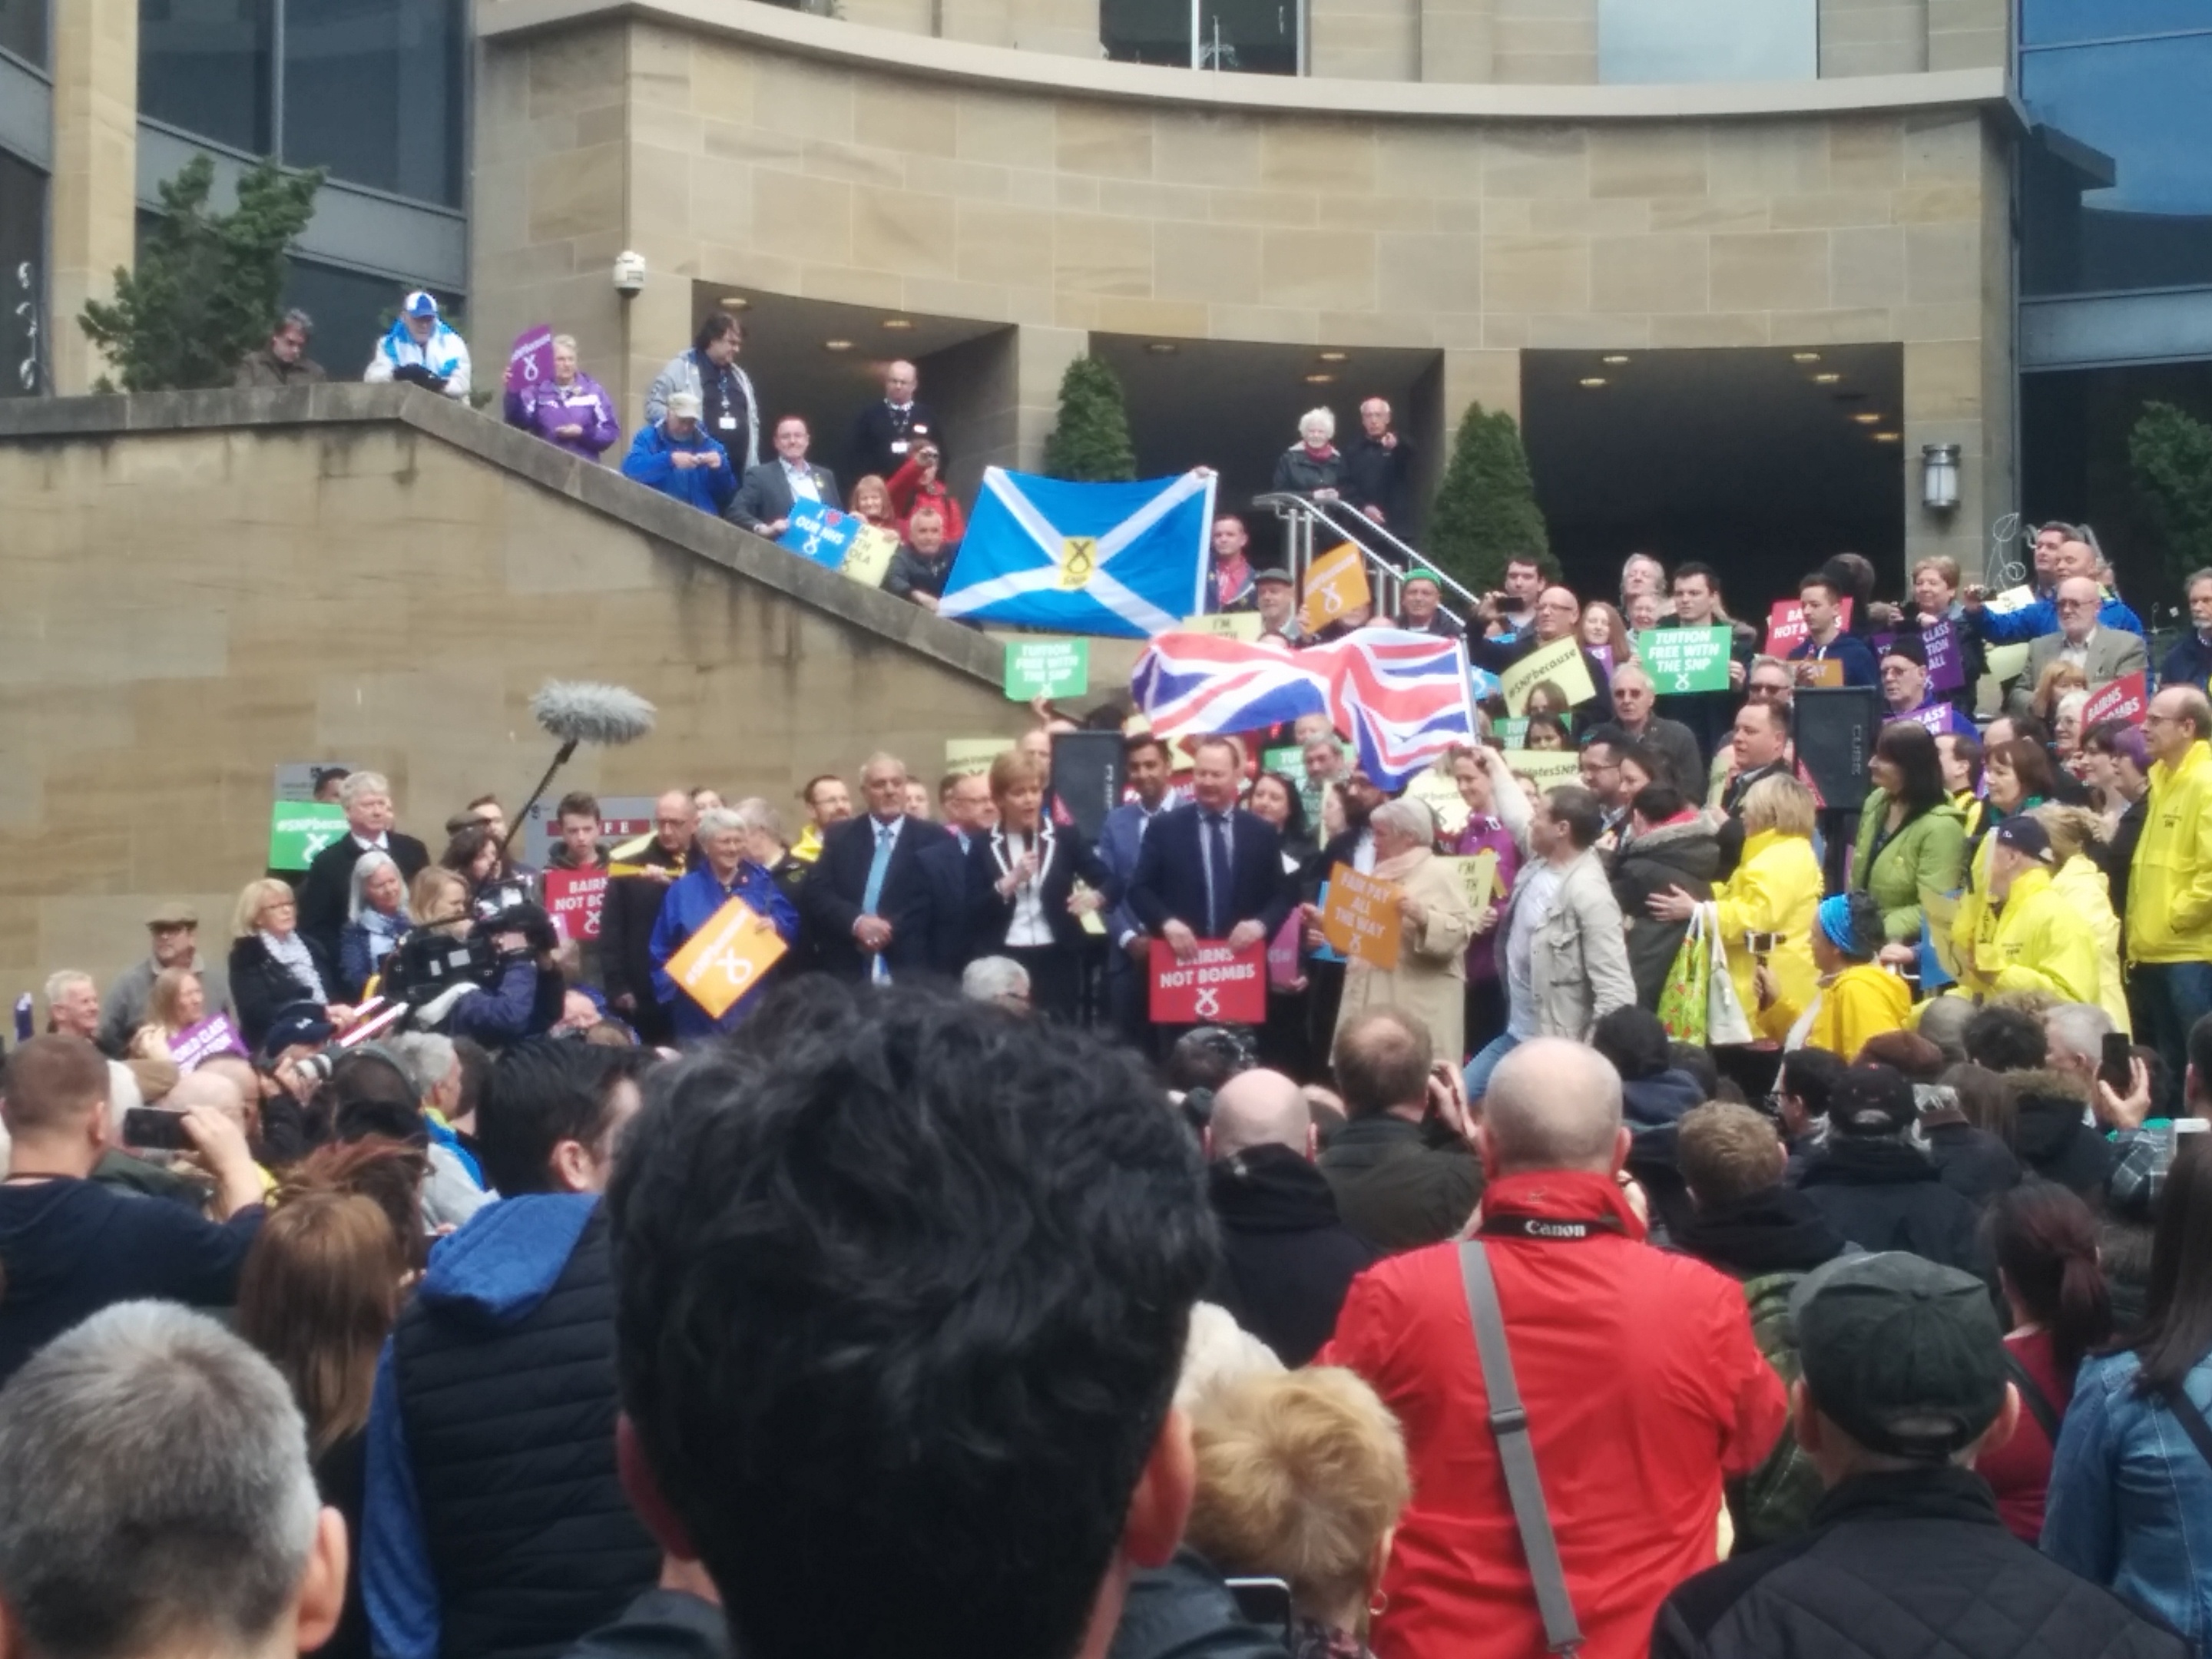 Alistair McConnachie waves his Union Flag at Nicola Sturgeon before being escorted away by police